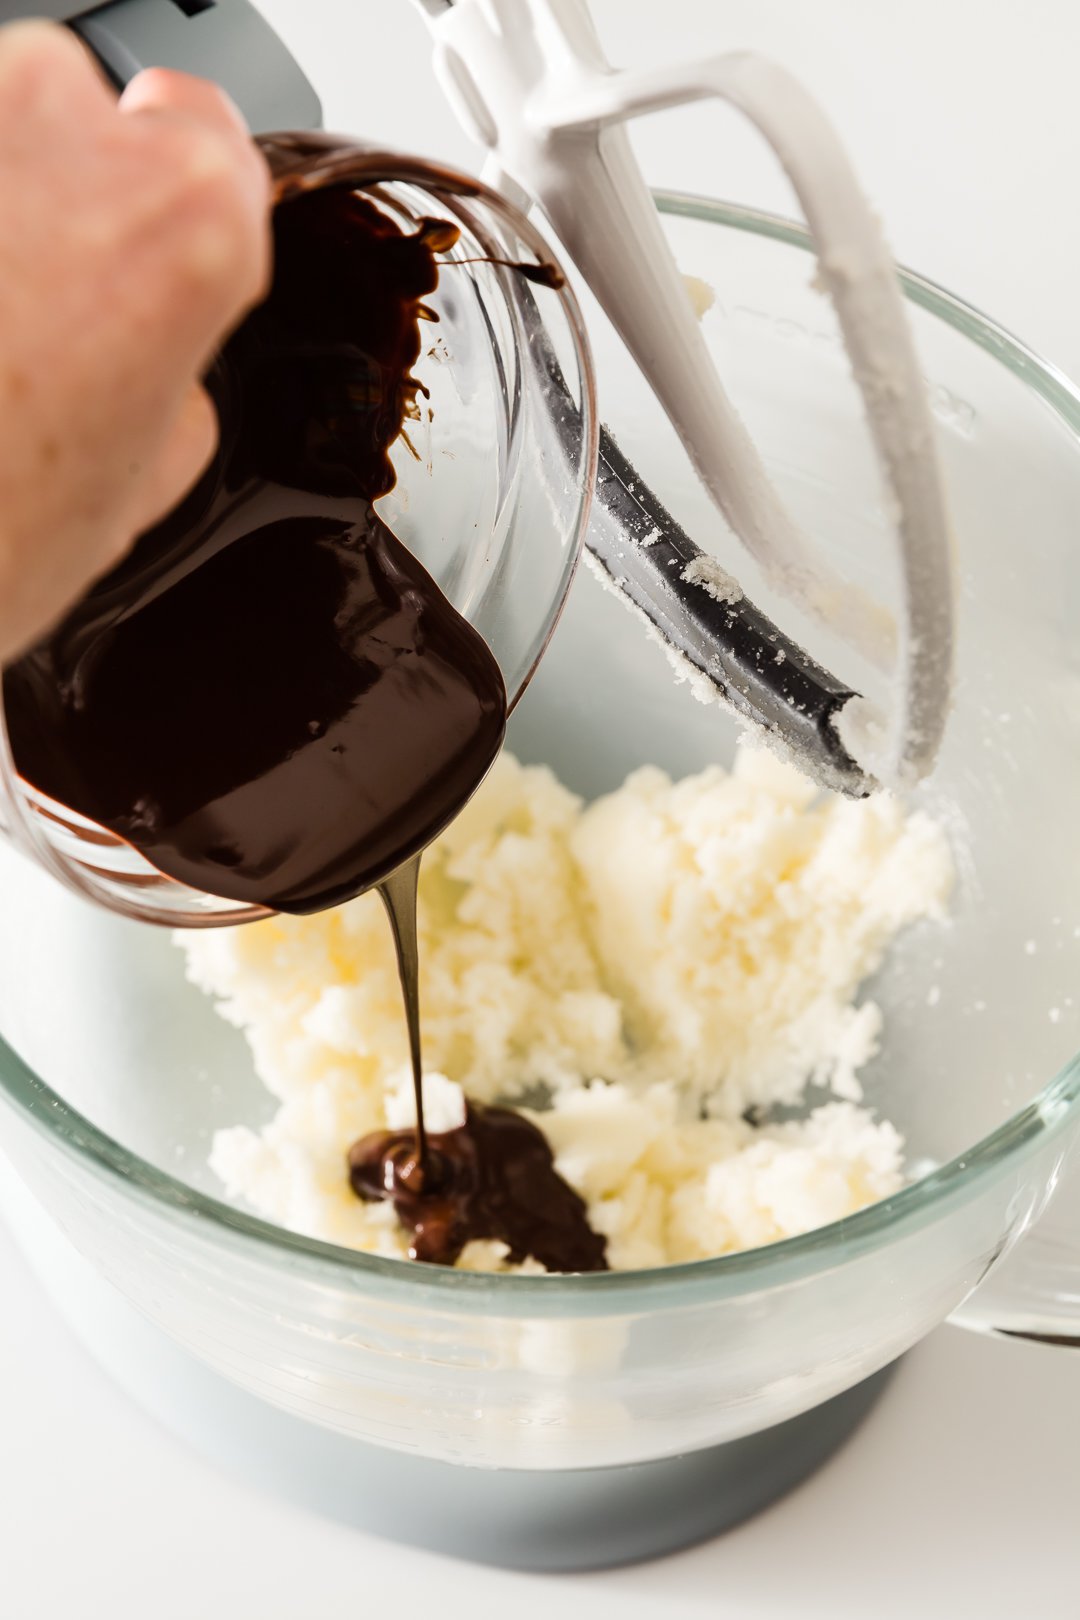 Adding melted chocolate to chocolate batter